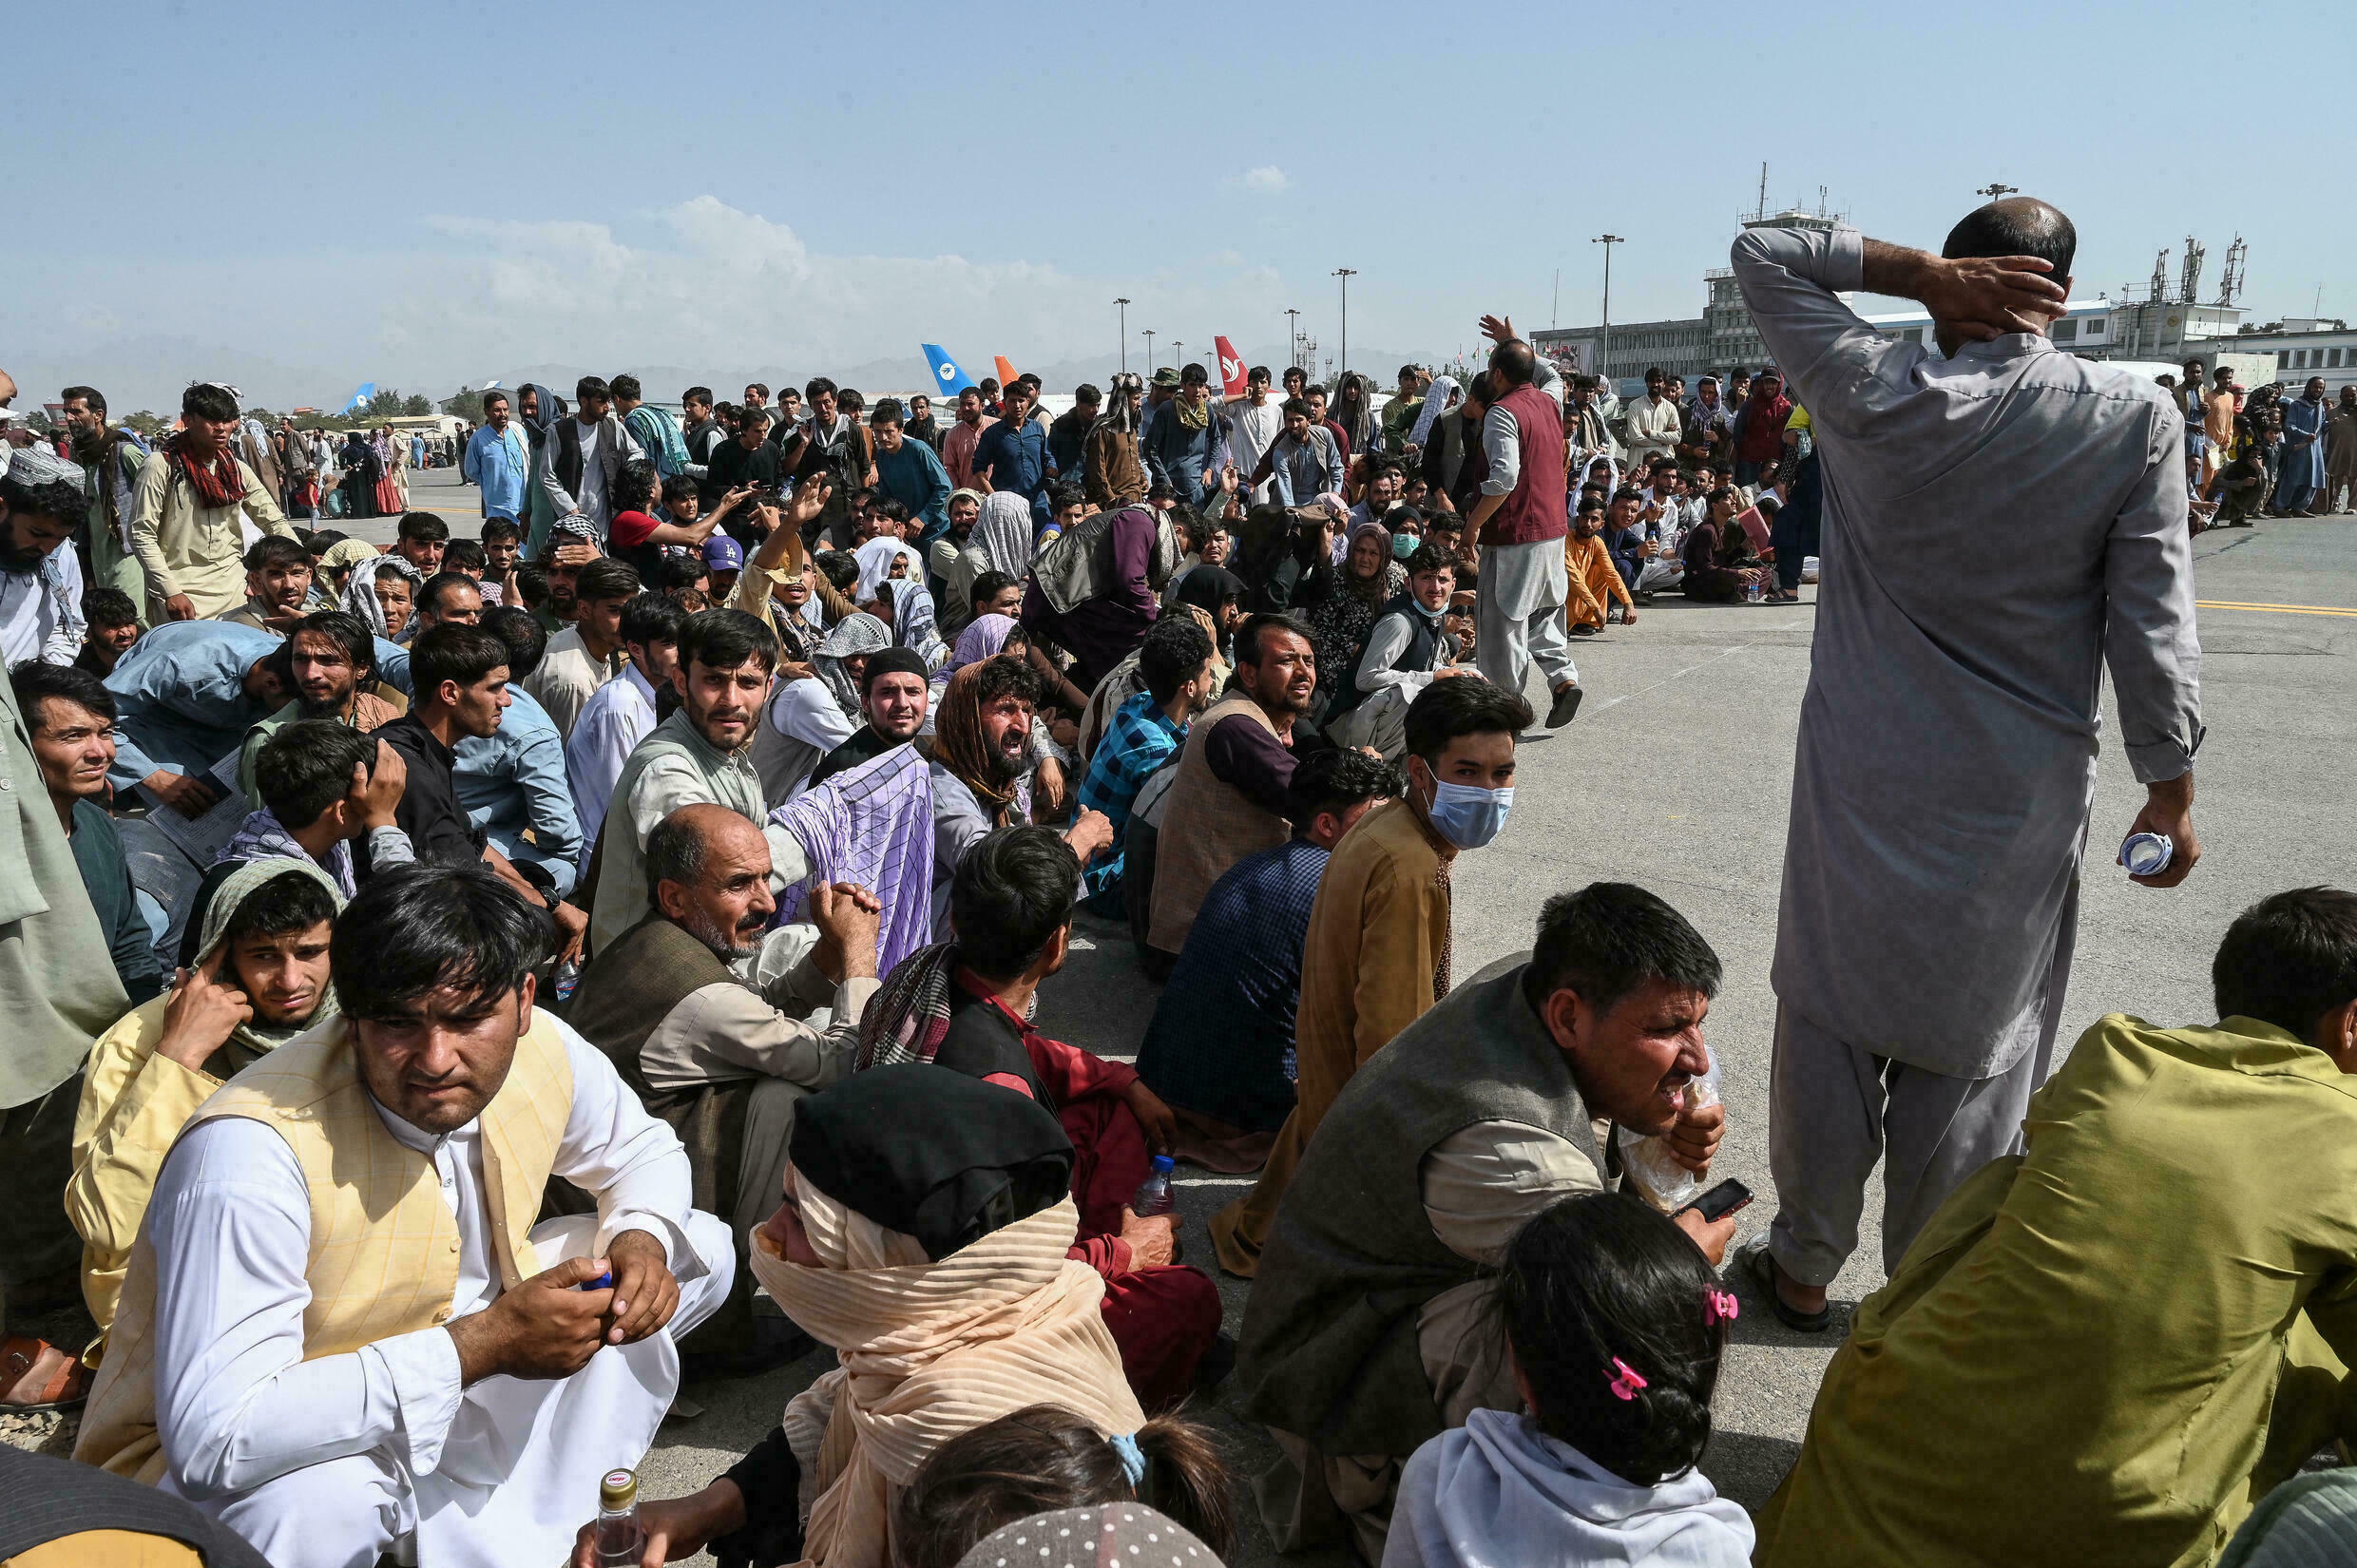 Thousands of Afghans crowded on August 16 at the Hamid Karzai International Airport in Kabul to exit Afghanistan after the Taliban entered the capital / credit: AFP/Wakil Kohsar